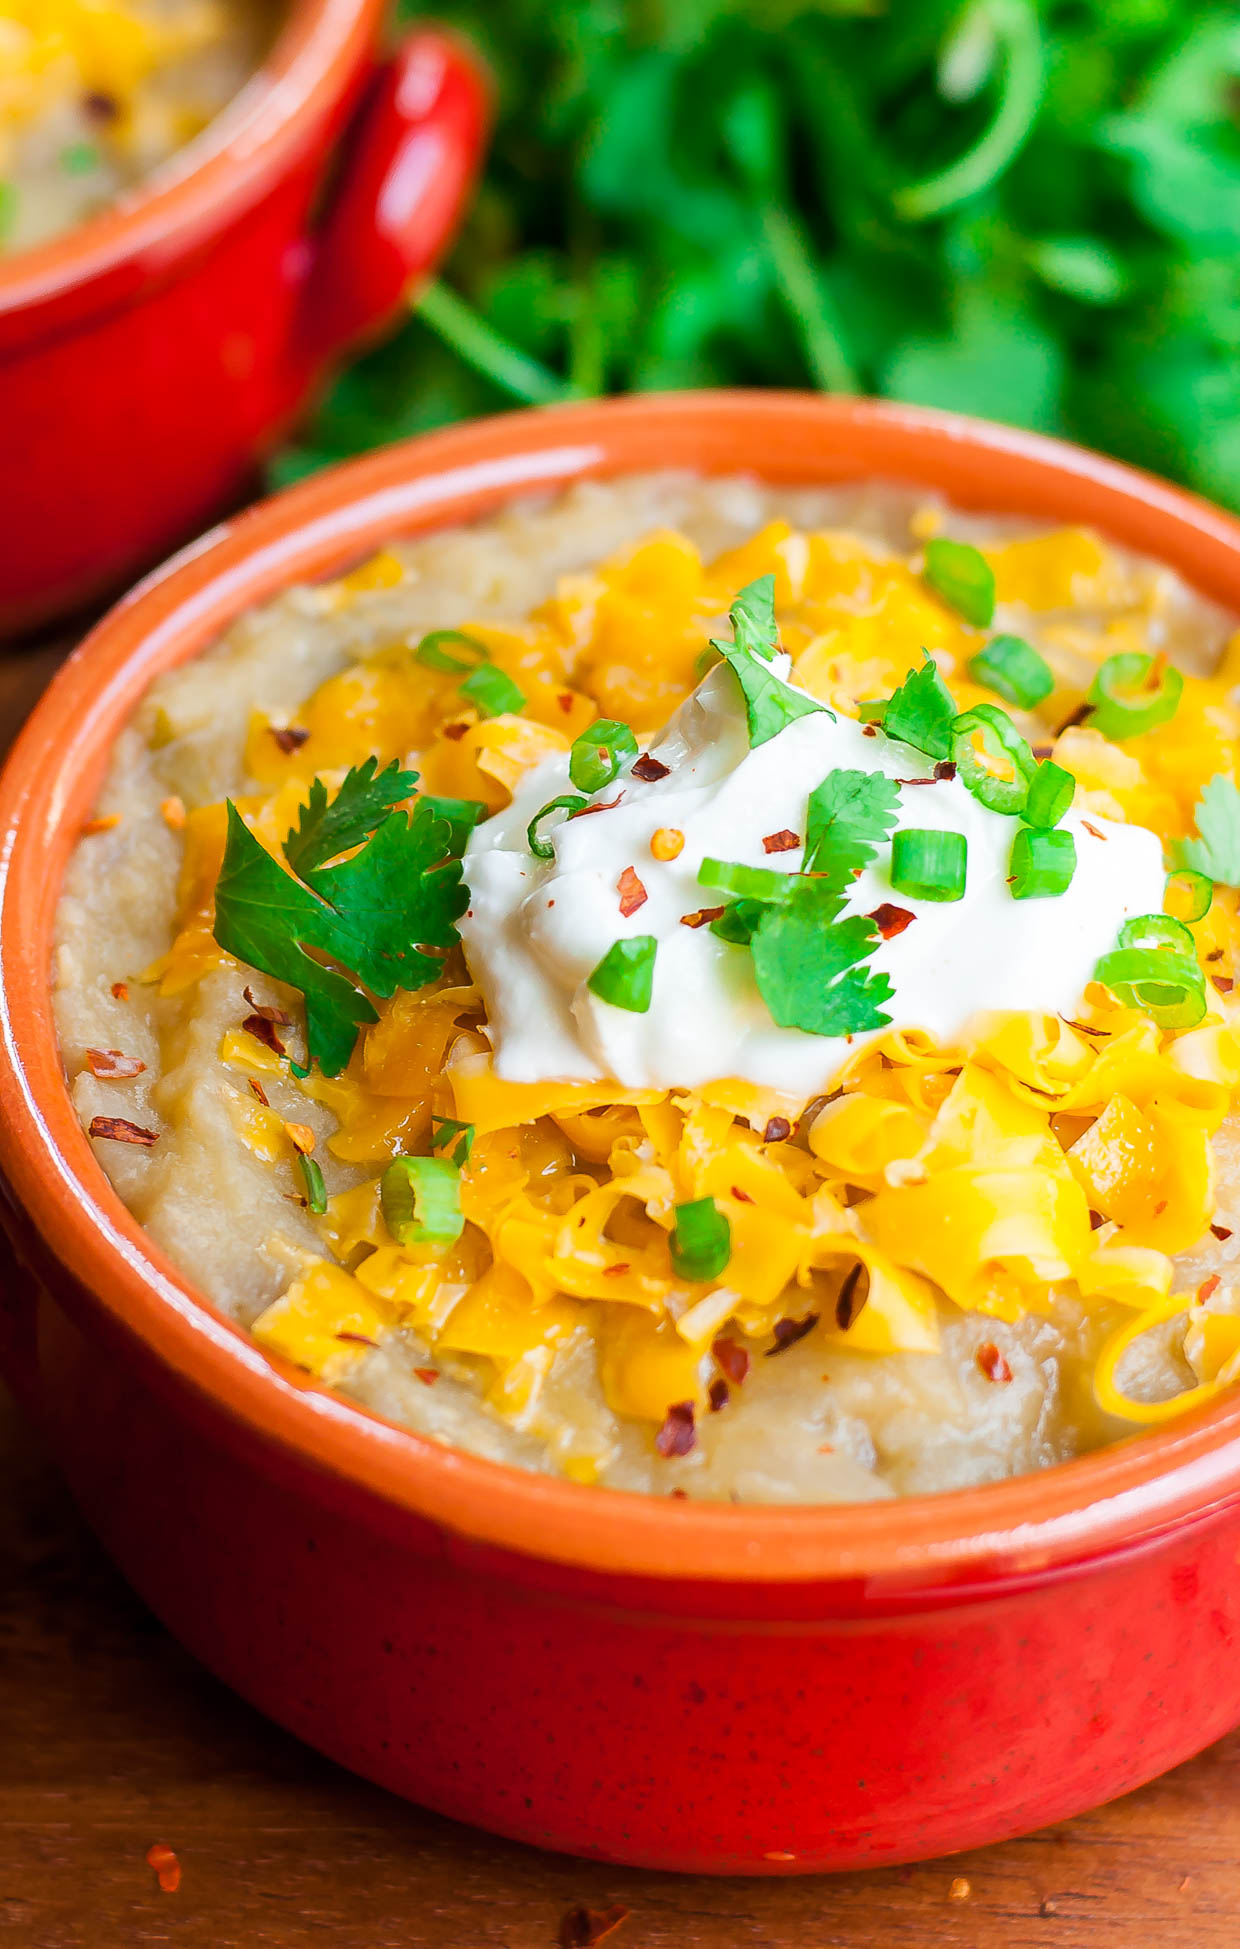 This slow cooker Mexican Baked Potato Soup will warm you up on a cool day with its healthy and delicious twist on classic baked potato soup!